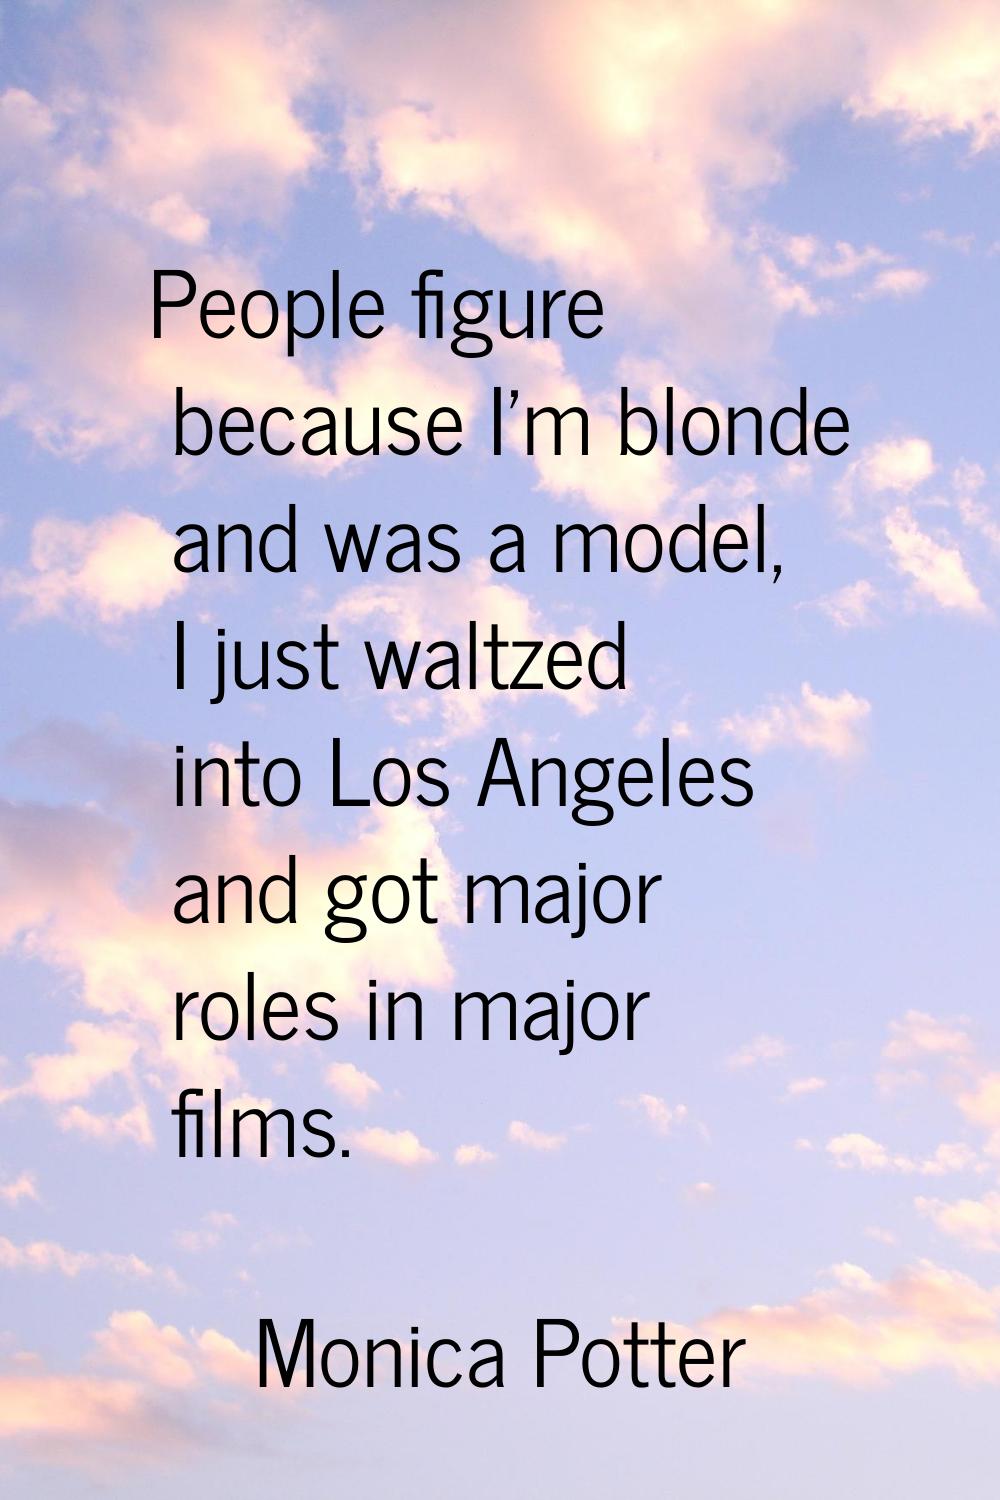 People figure because I'm blonde and was a model, I just waltzed into Los Angeles and got major rol